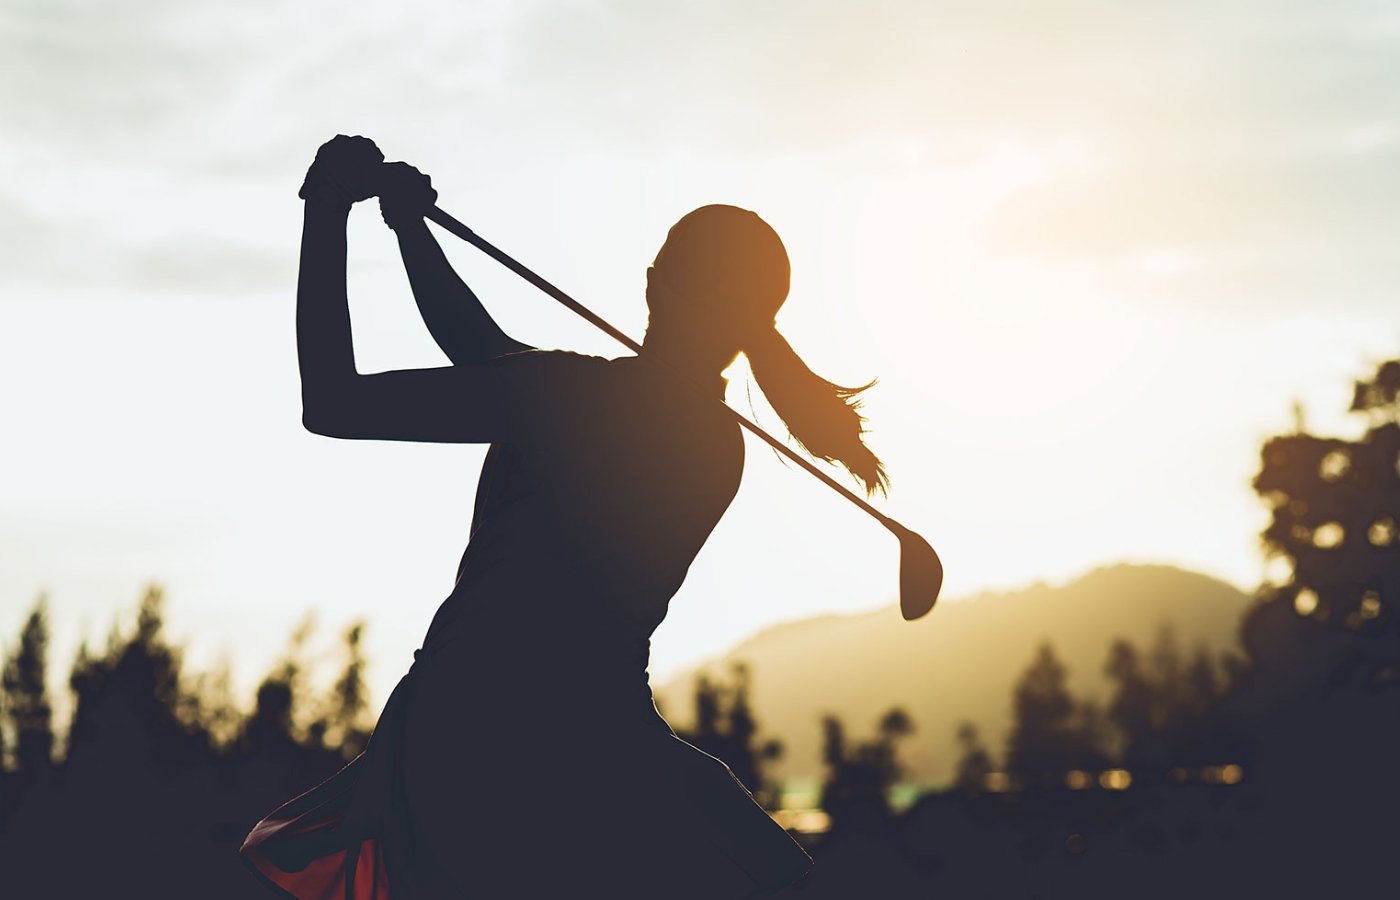 How Golf Wear Became a Fashion Statement for a New Breed of Golfer